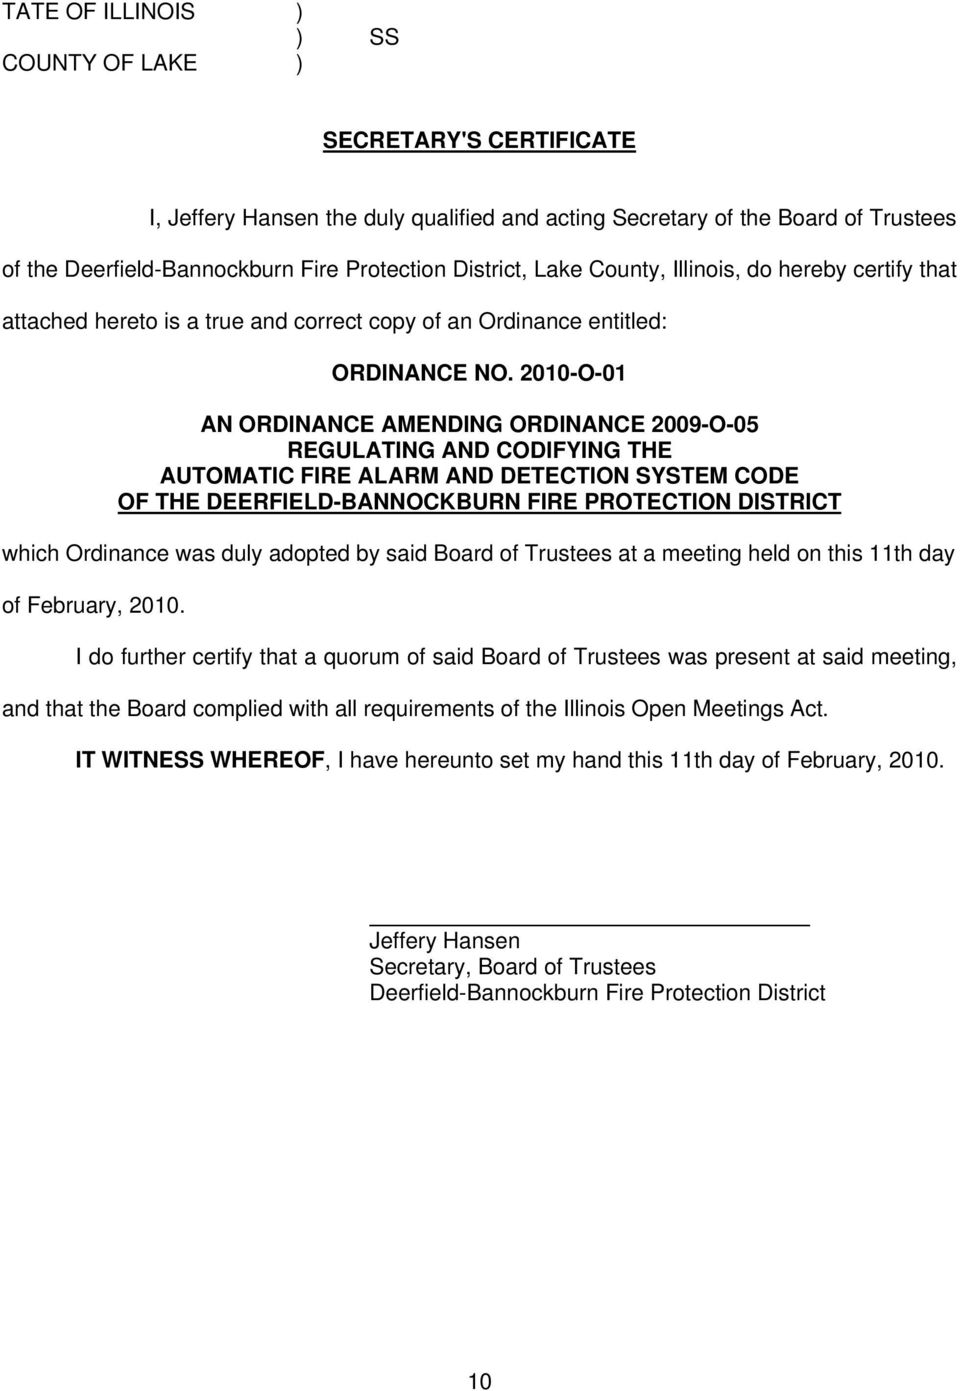 2010-O-01 AN ORDINANCE AMENDING ORDINANCE 2009-O-05 REGULATING AND CODIFYING THE AUTOMATIC FIRE ALARM AND DETECTION SYSTEM CODE OF THE DEERFIELD-BANNOCKBURN FIRE PROTECTION DISTRICT which Ordinance